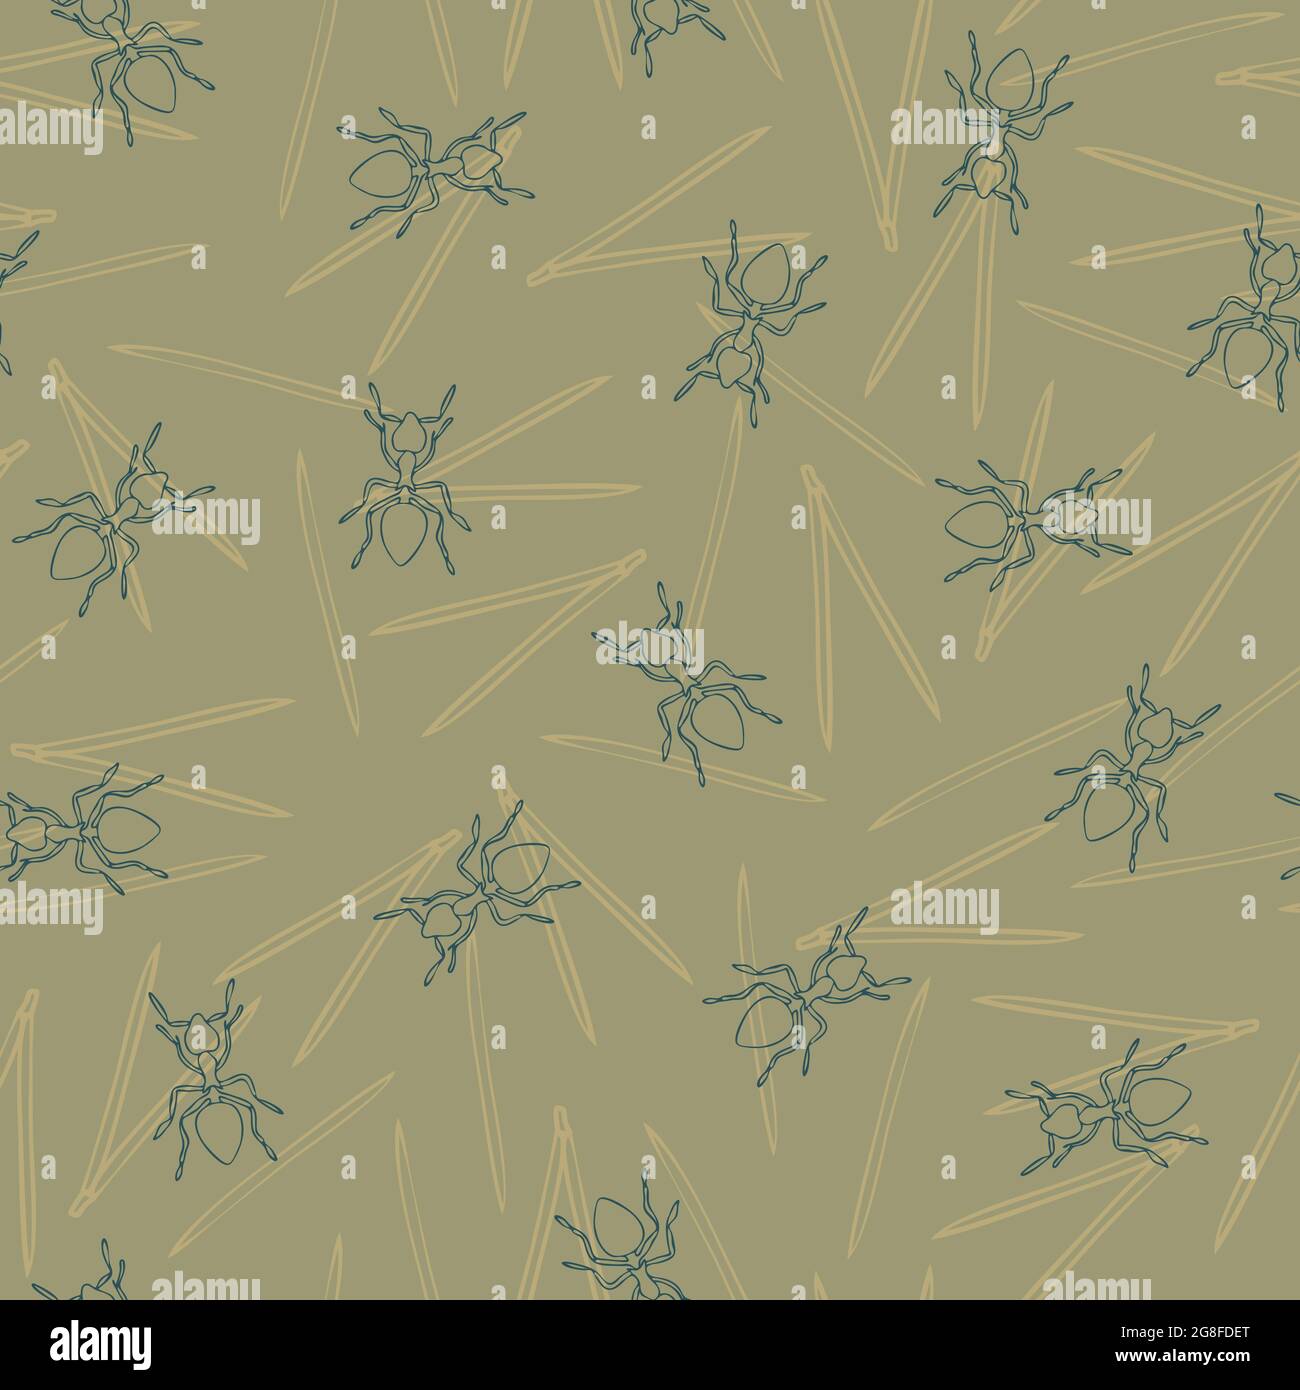 Seamless vector pattern with ant nest and thorns on grey background. Simple animal line art wallpaper design. Stock Vector